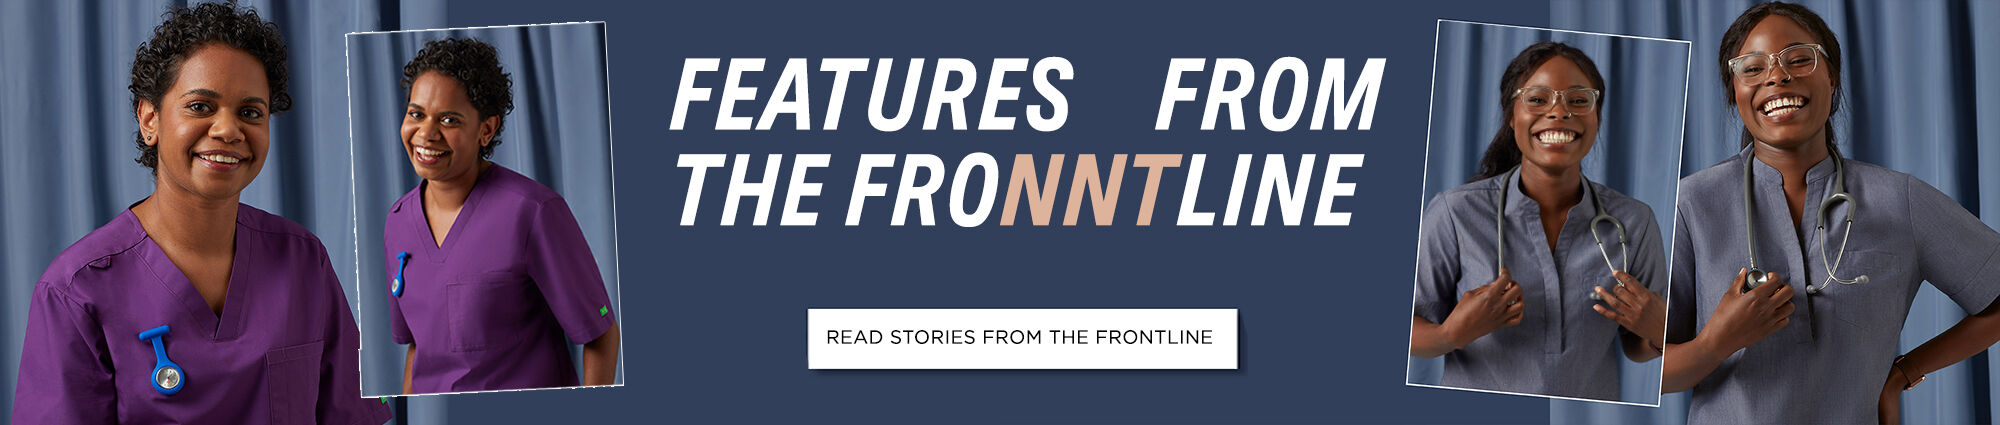 Features from the Frontline